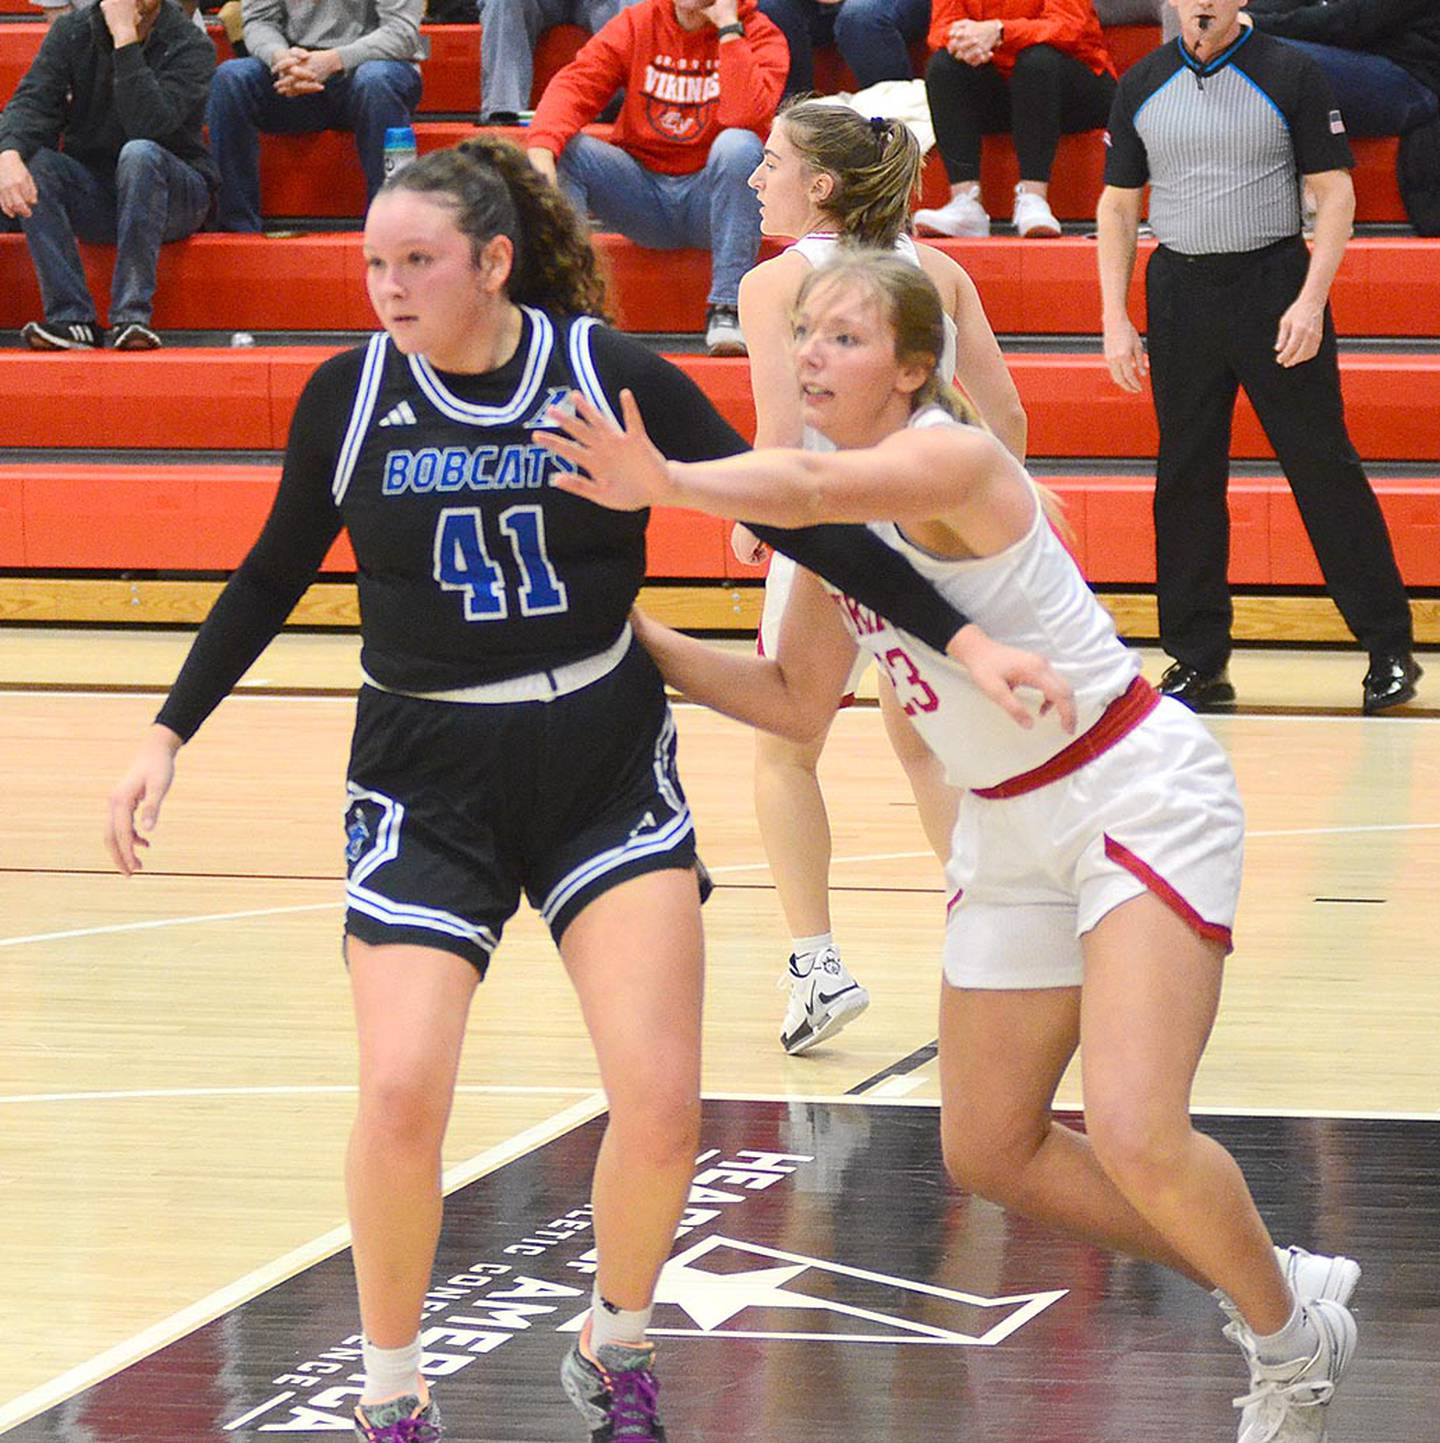 Grand View's Brianna Fields of Creston (right) defends the post during a Heart of America Conference Tournament victory over Peru State. The Vikings won the league tourney to earn an automatic bid to the NAIA national tournament.